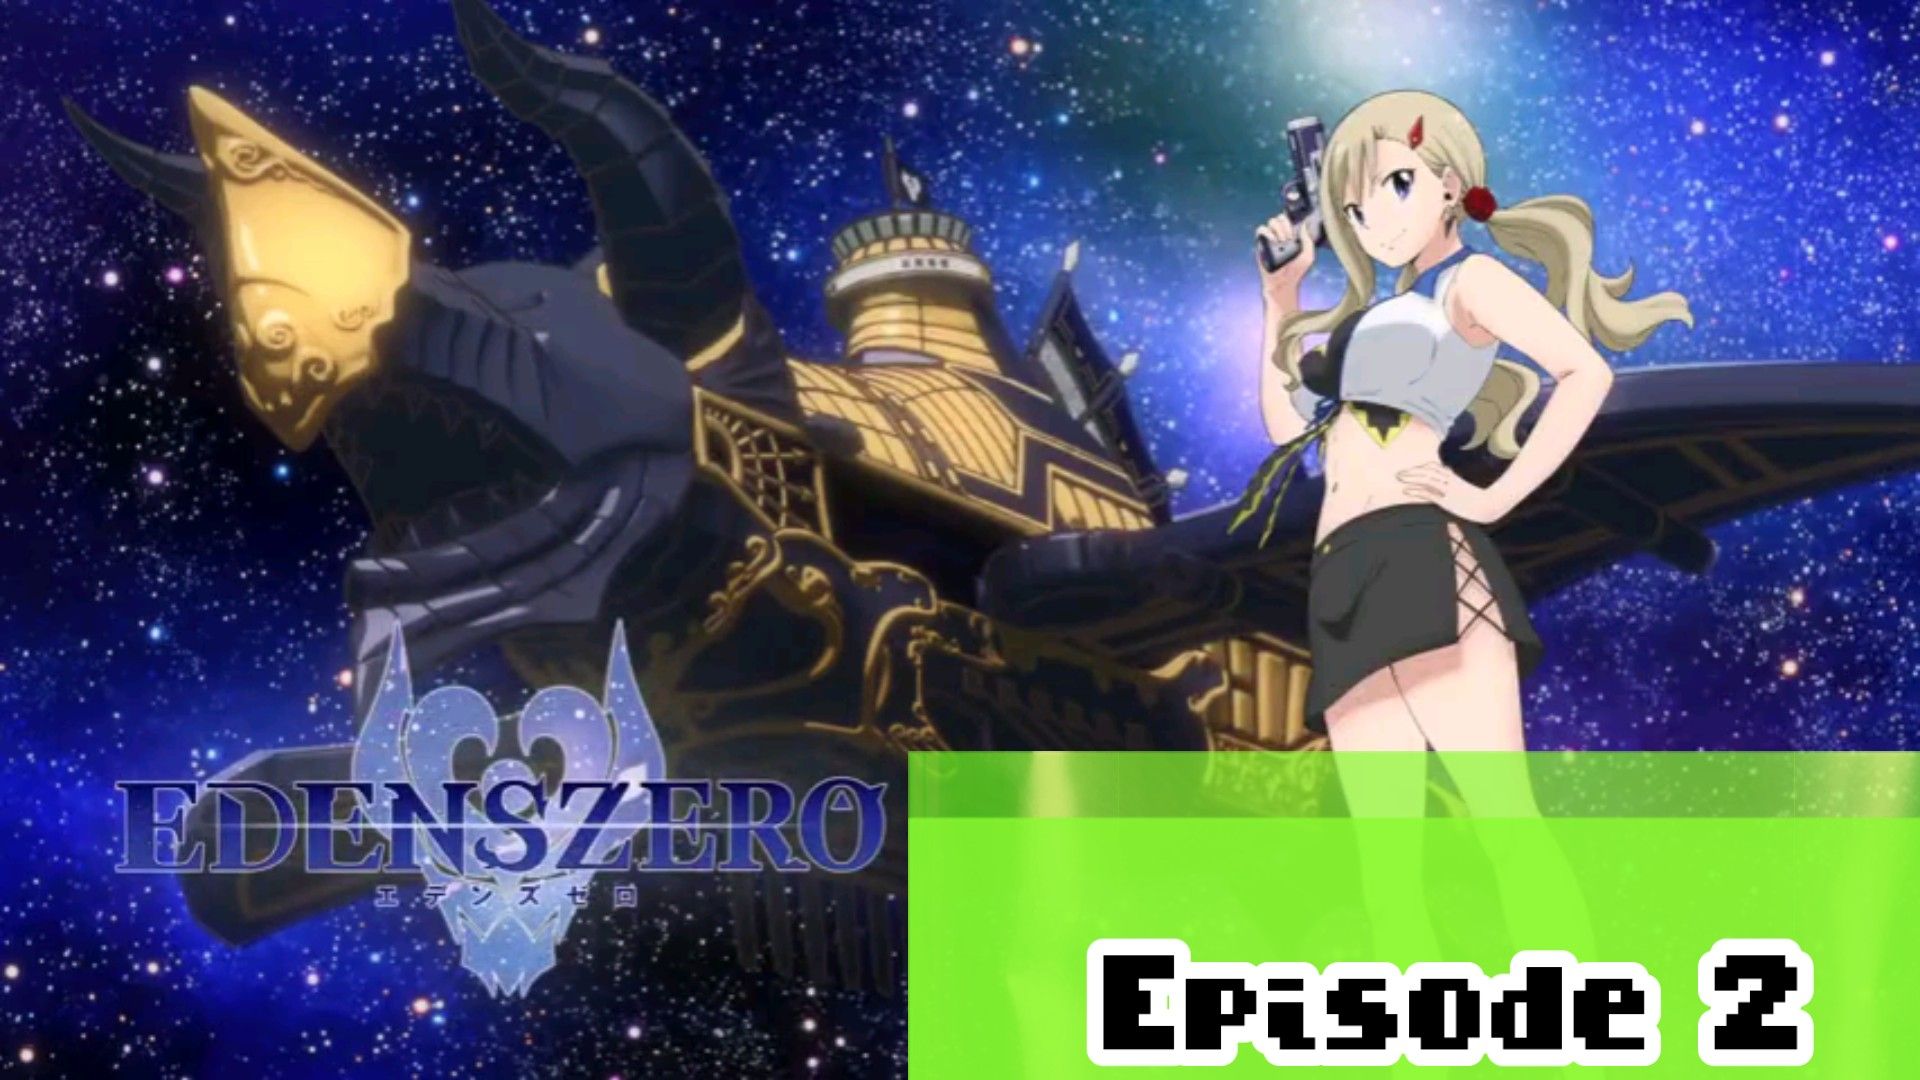 Edens Zero - Shows Online: Find where to watch streaming online - Justdial  Mexico